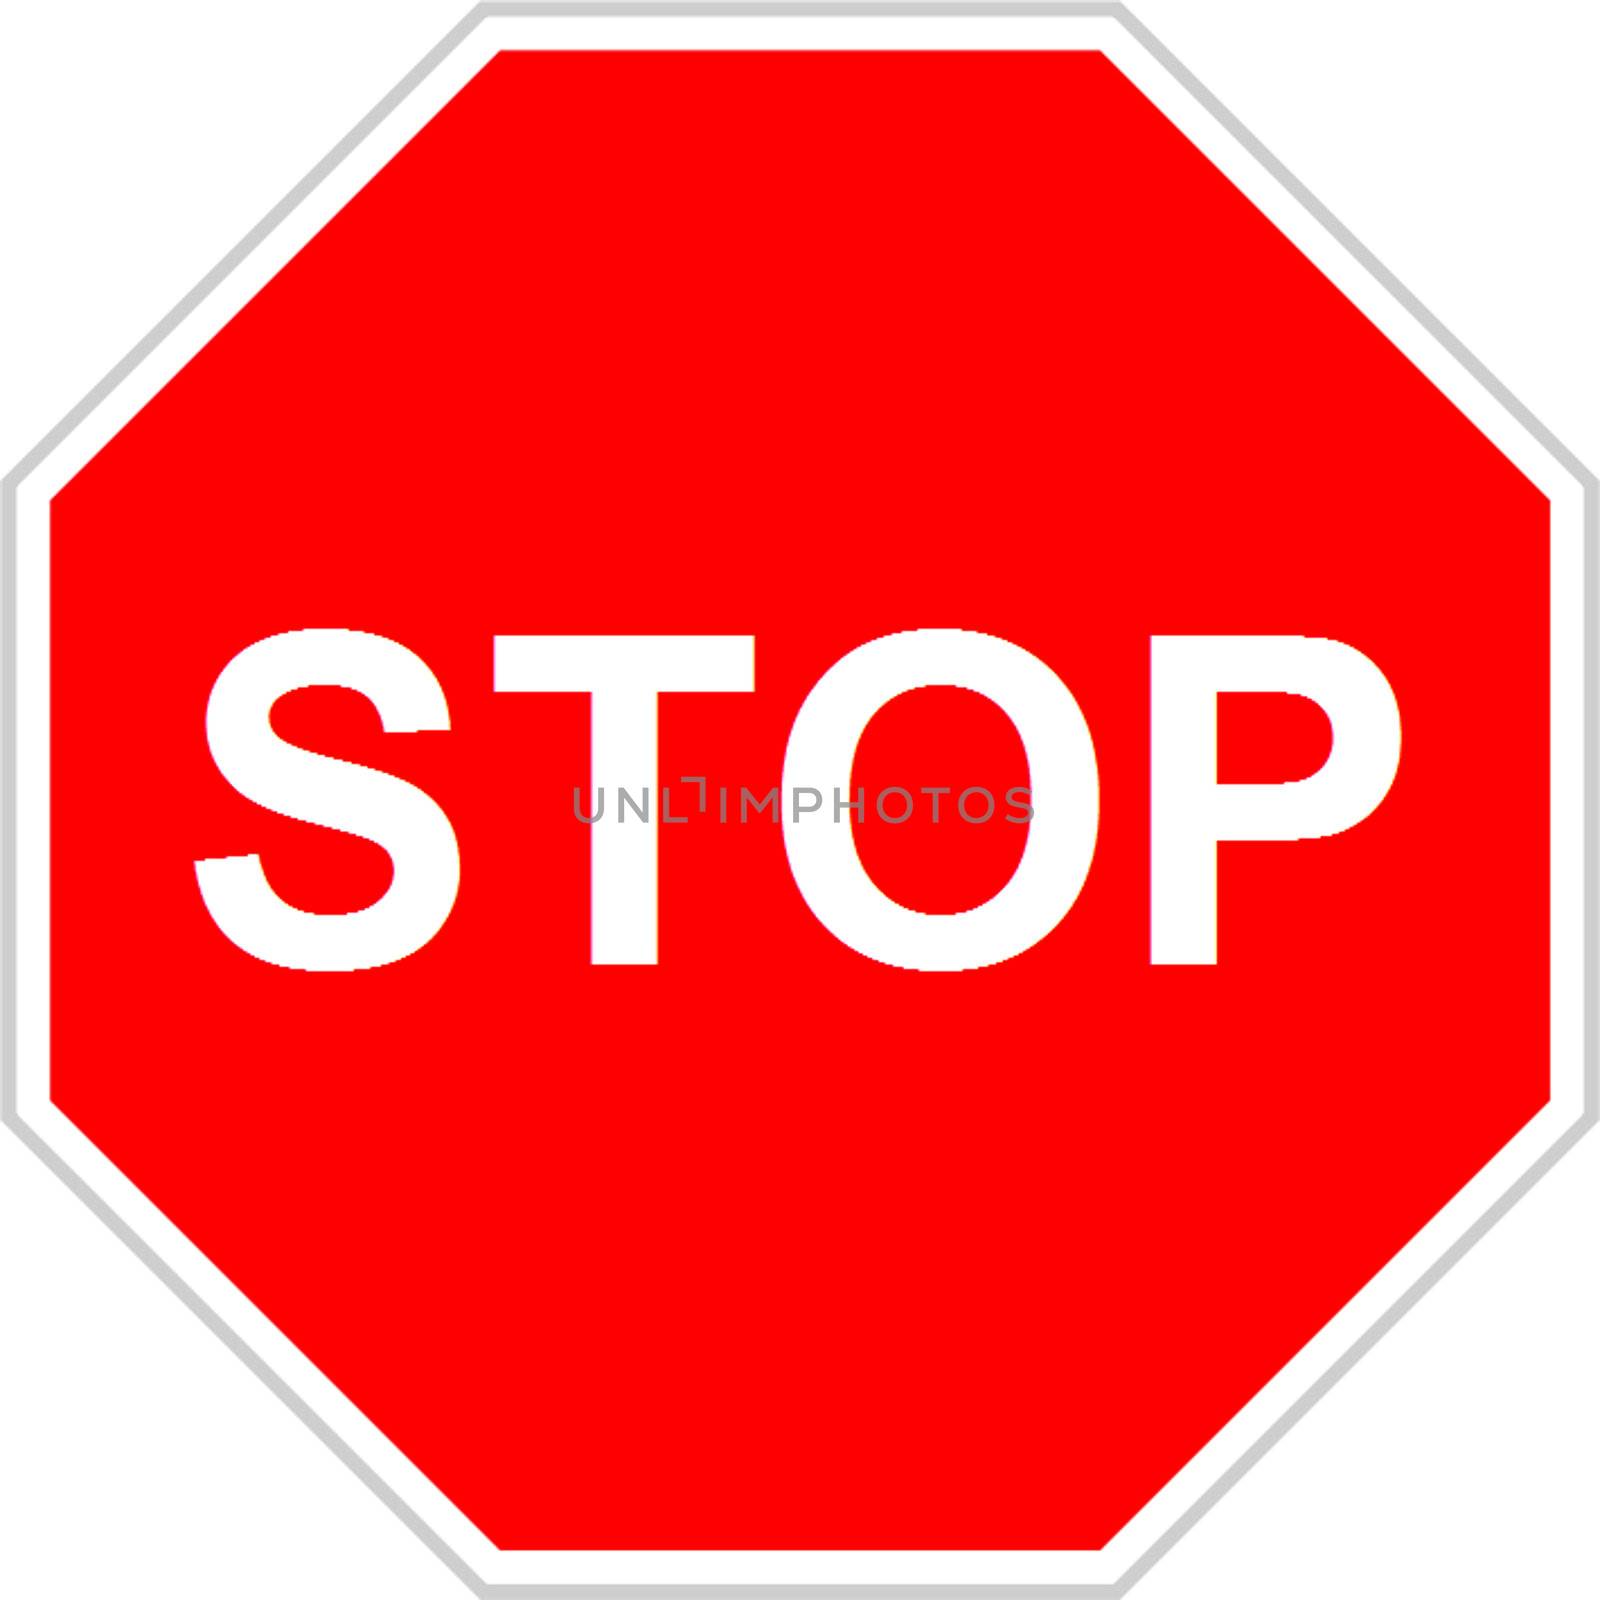 Stop sign isolated over white background